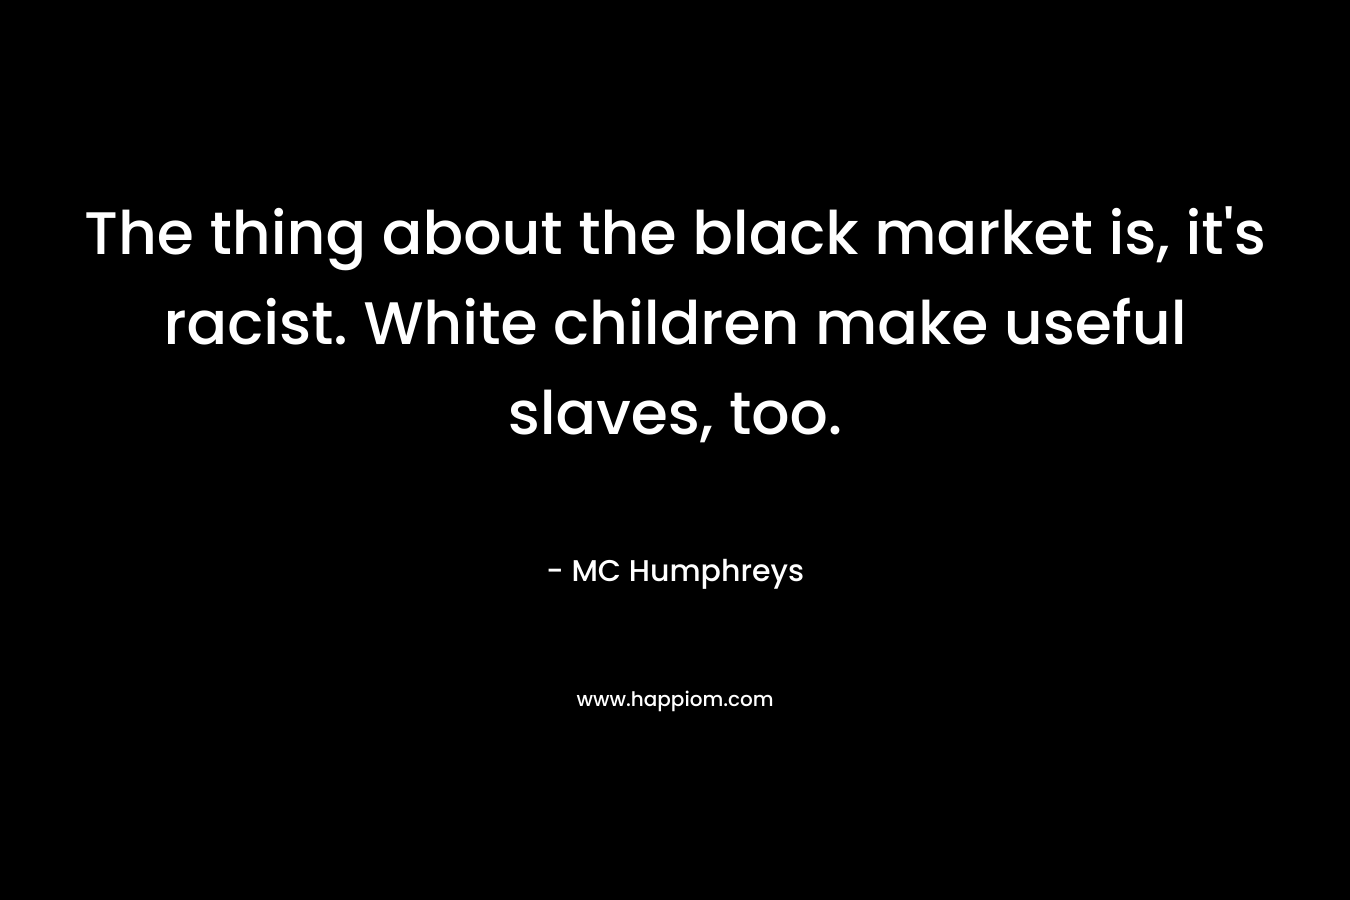 The thing about the black market is, it’s racist. White children make useful slaves, too. – MC Humphreys